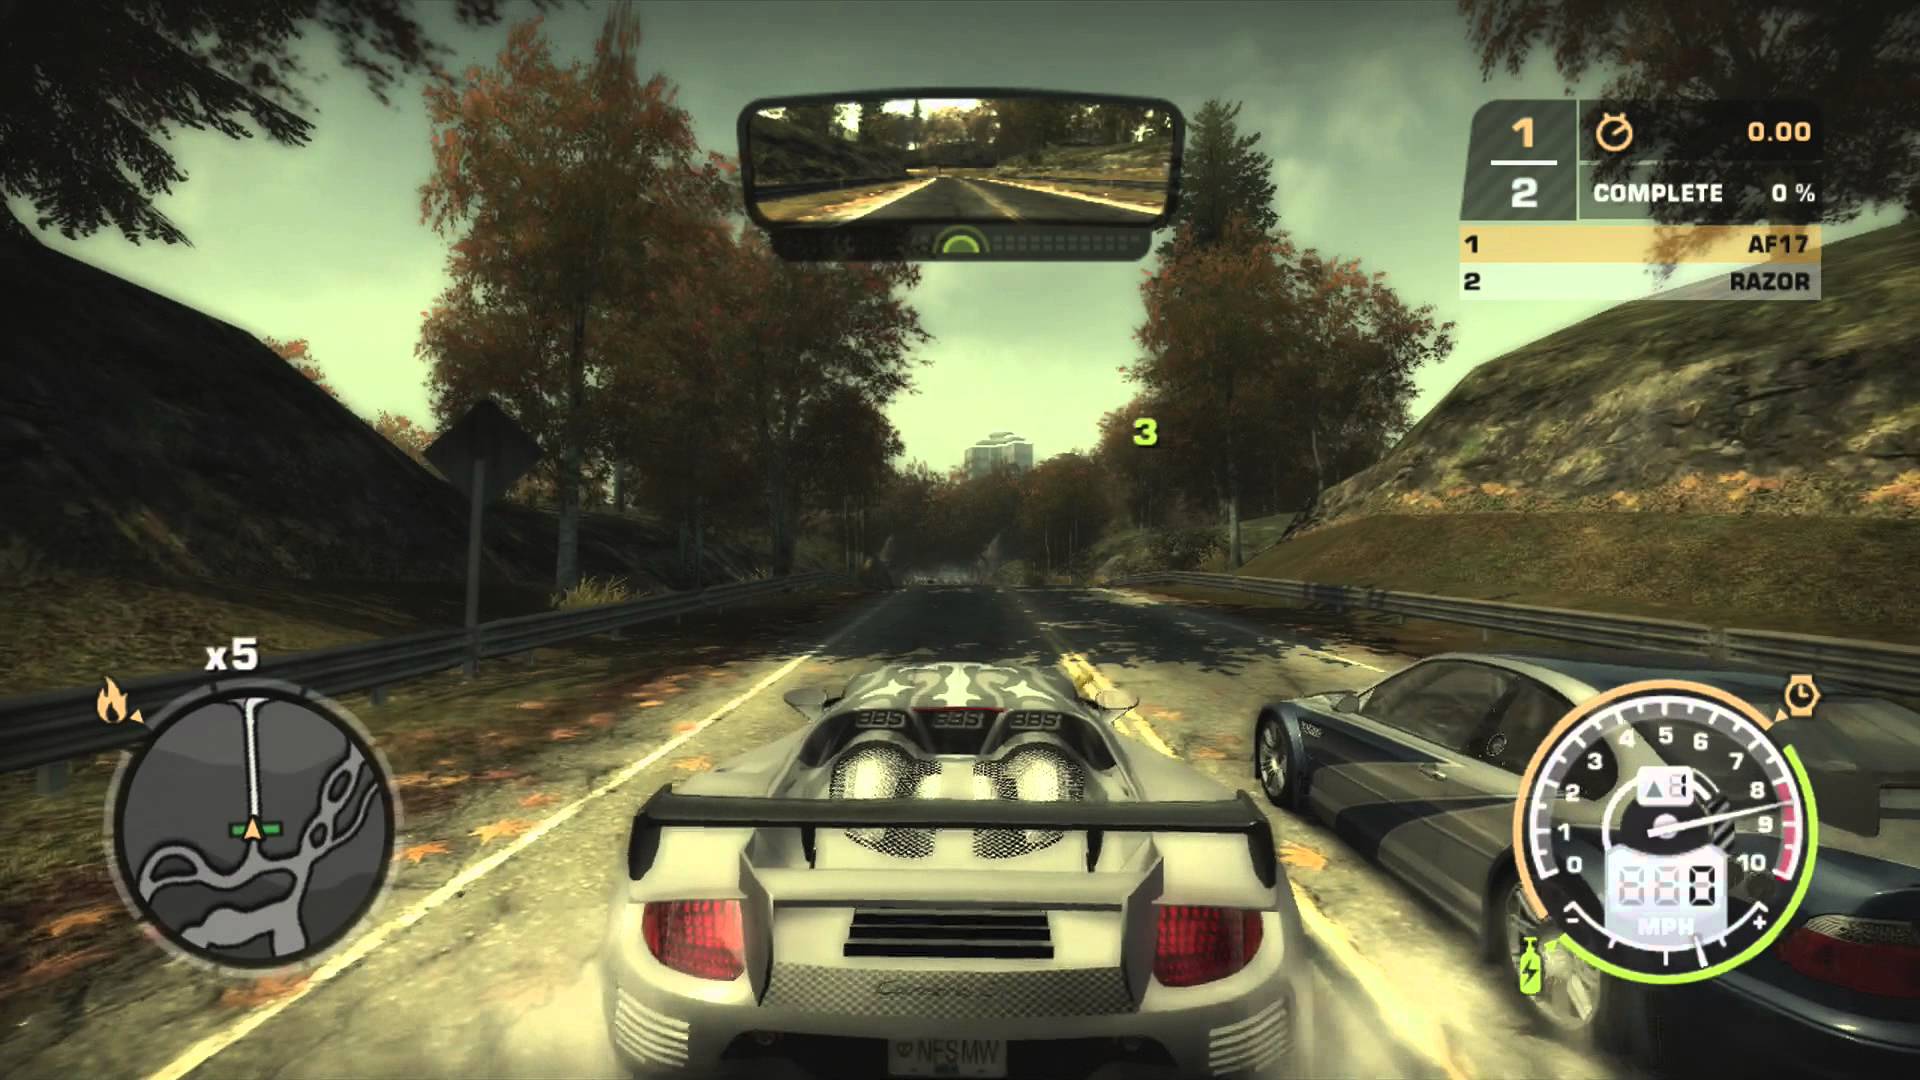 Карта гонки игры. Гонки NFS most wanted. Нид фор СПИД most wanted 2005. Нфс мост вантед 2005. Most wanted 2005 геймплей.